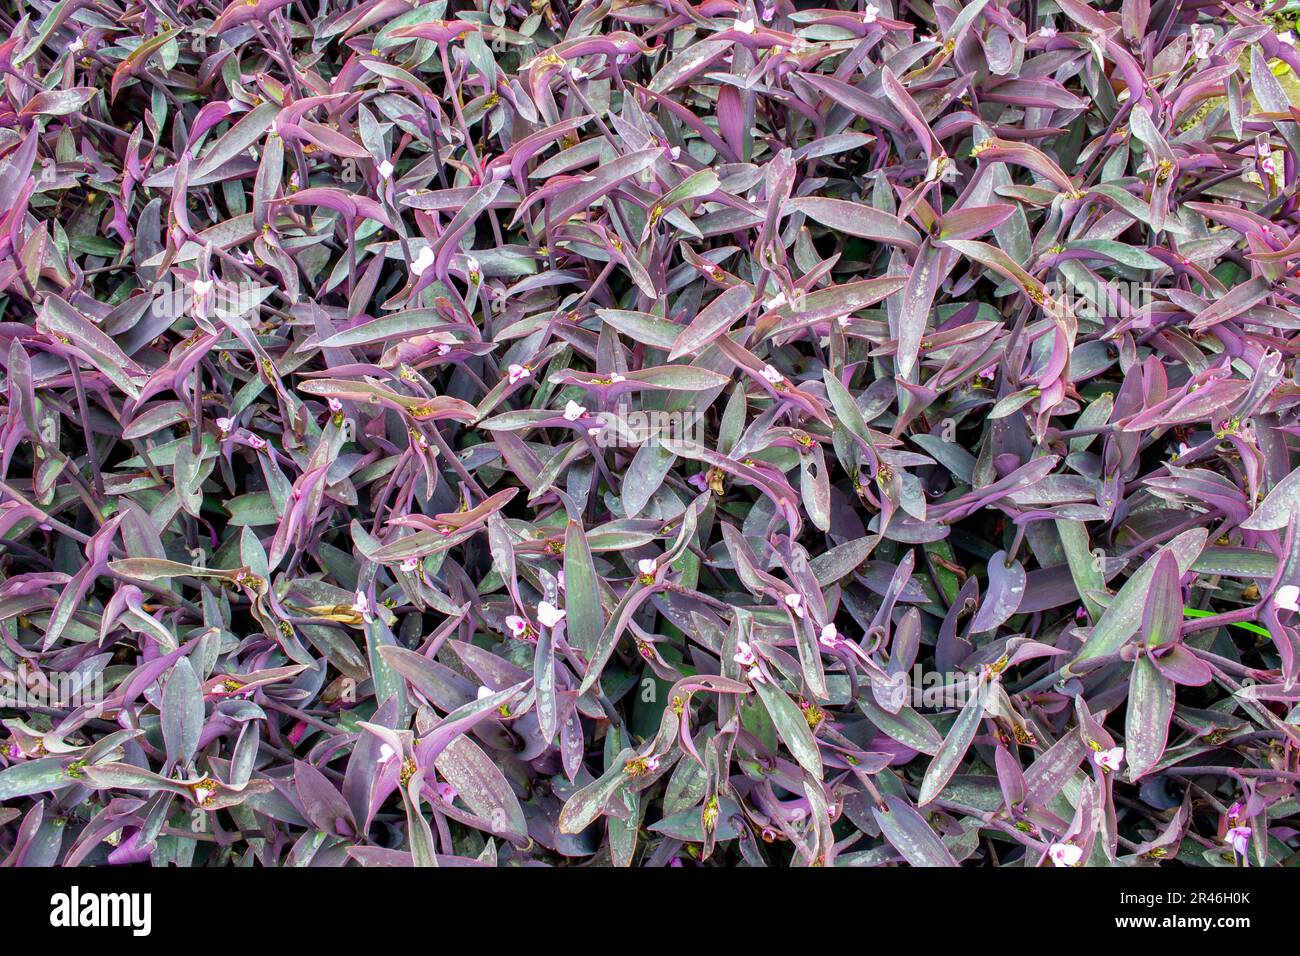 Top view of Tradescantia plants located in the Bicentenario  Park of the Miraflores district in Lima Peru. Stock Photo